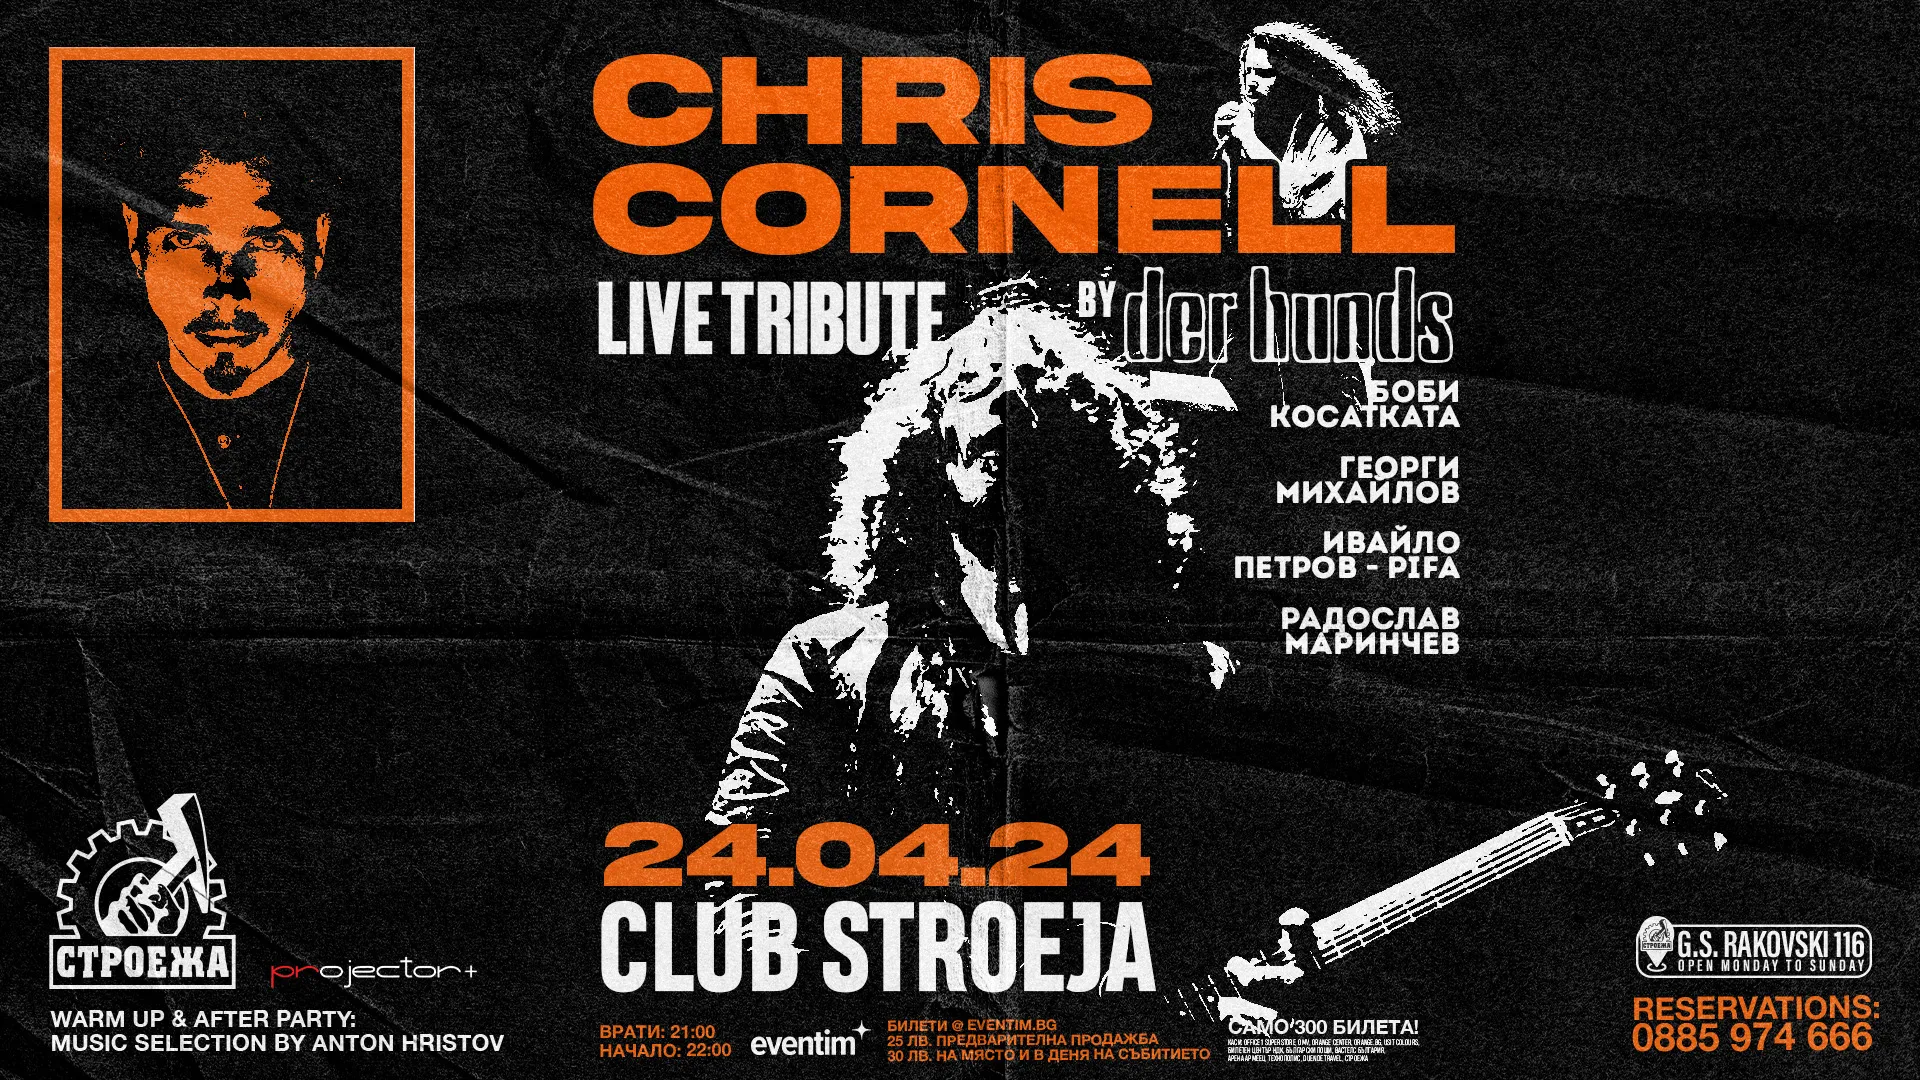 Chris Cornell Tribute by der hunds